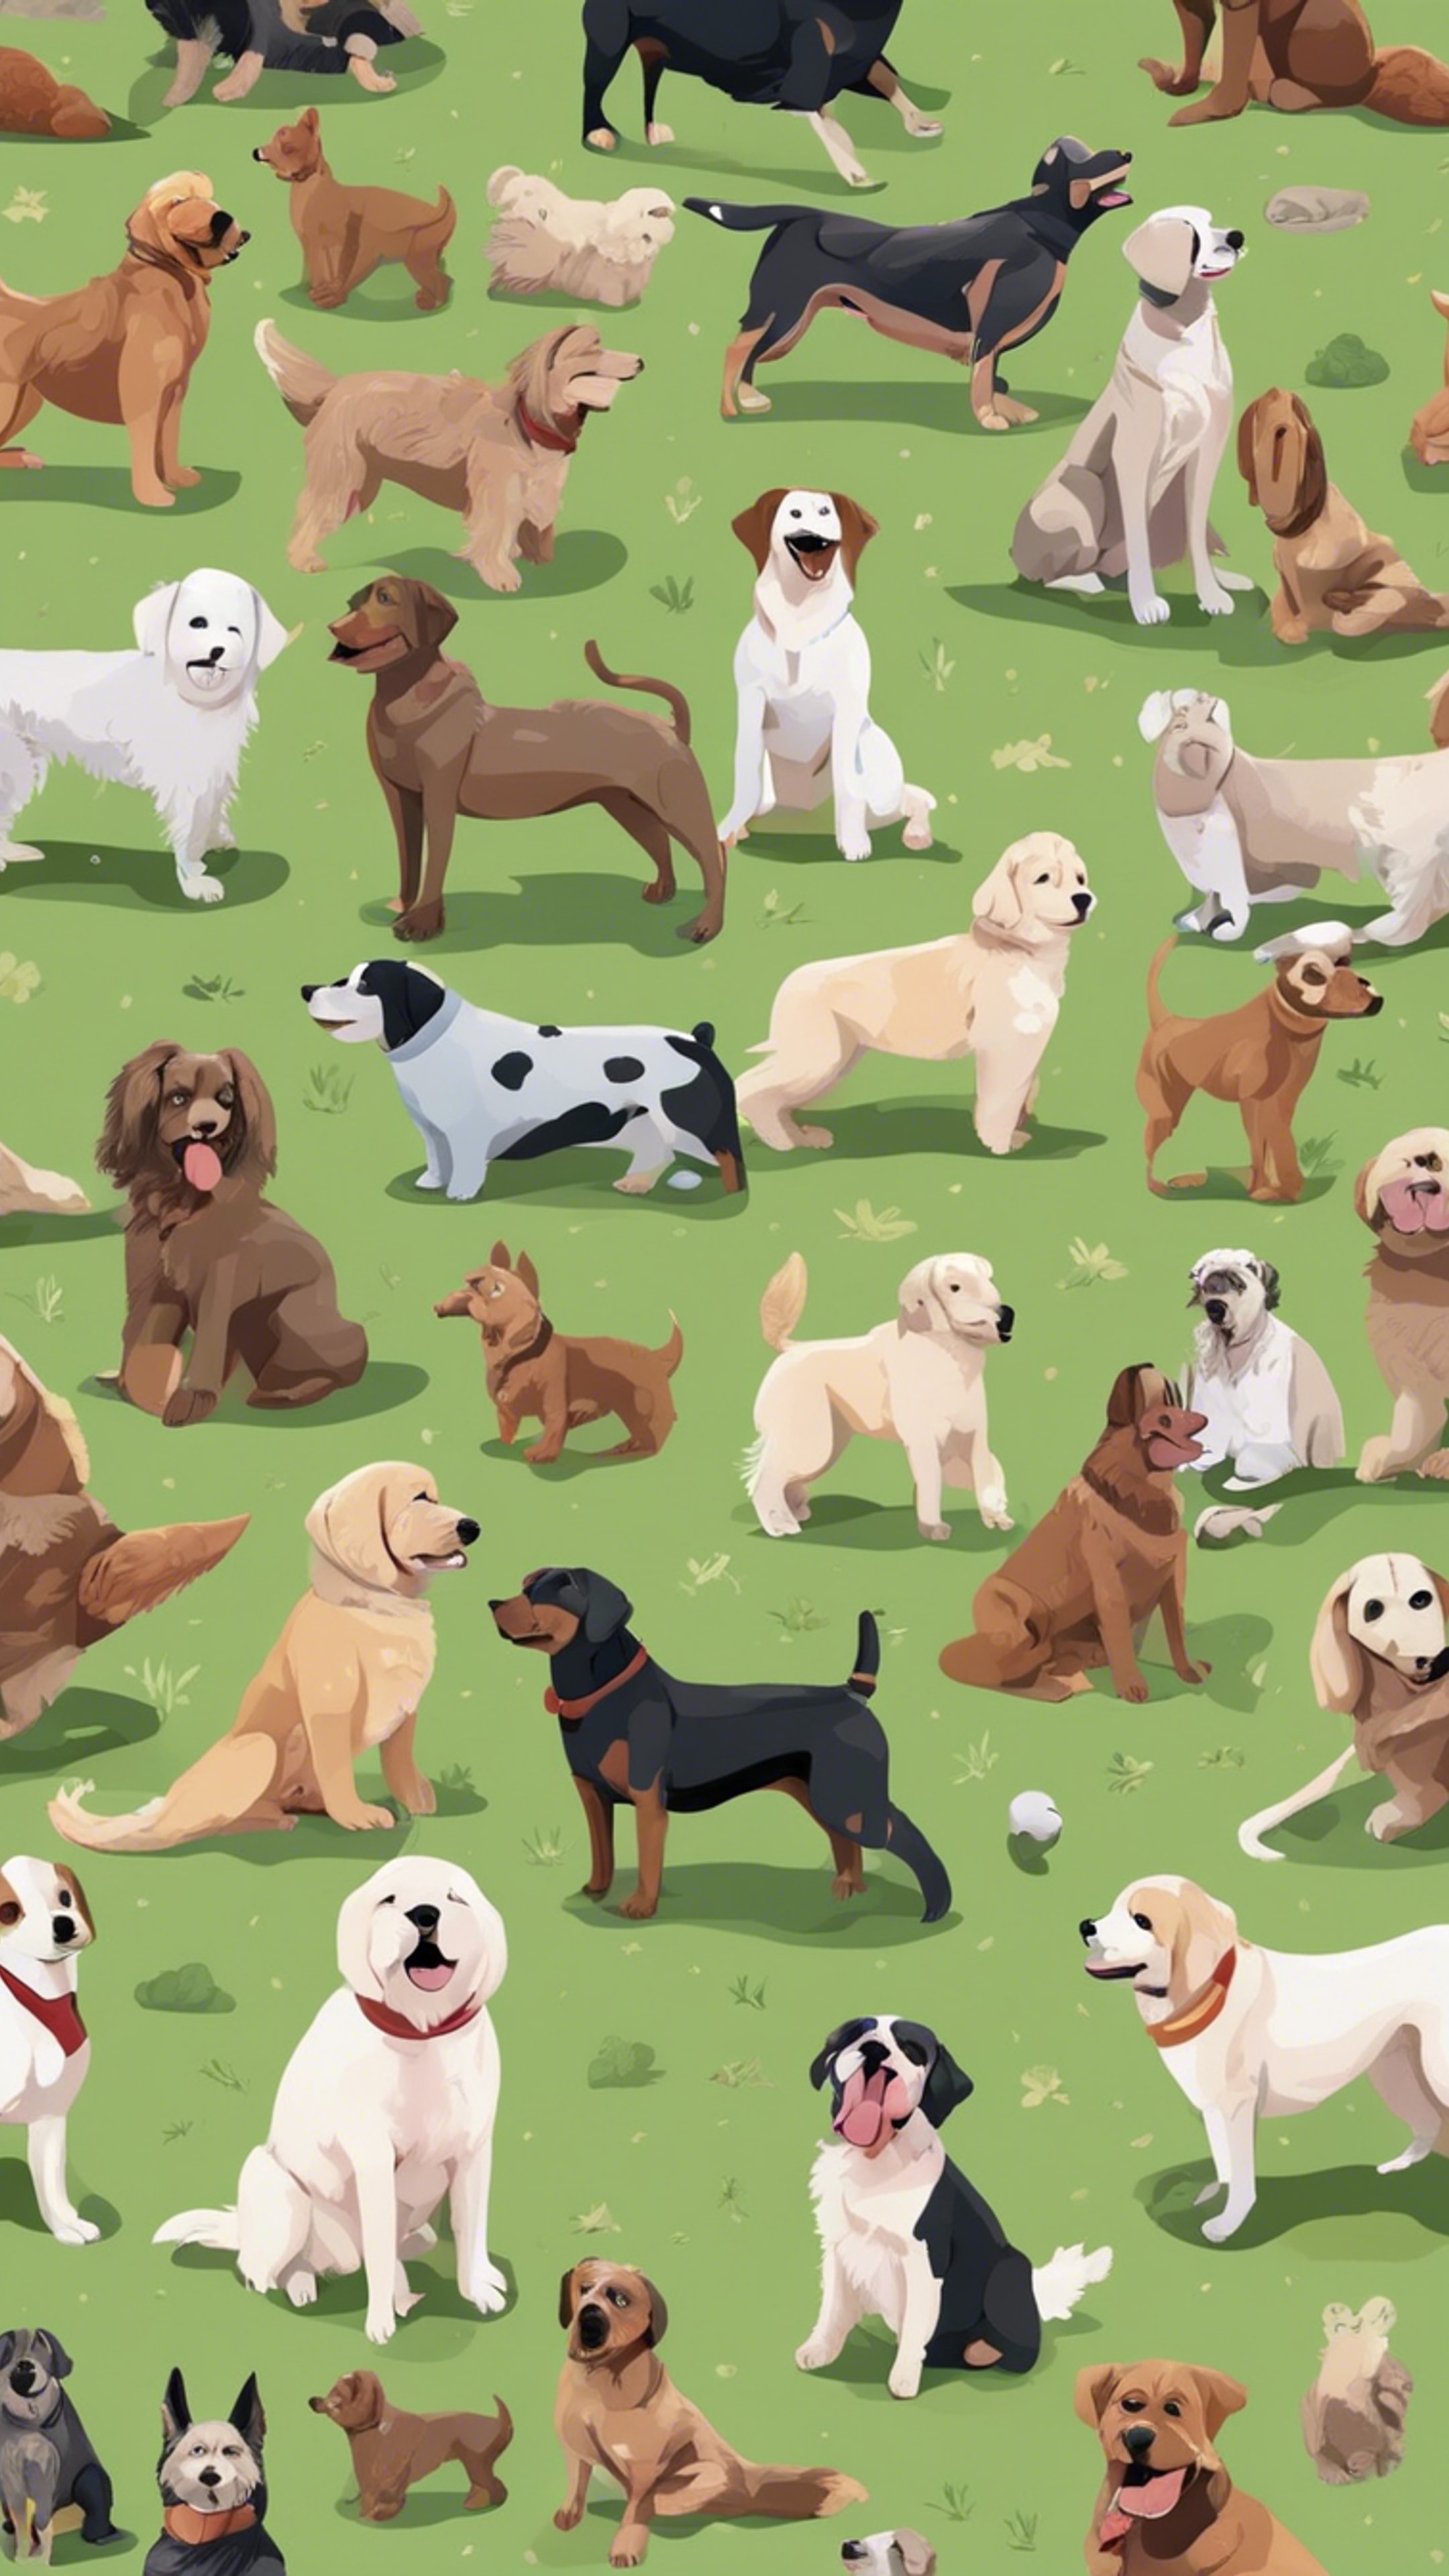 Seamless pattern of various breed of dogs playing in a park. Tapeta na zeď[140058c252ce4edb8a7a]